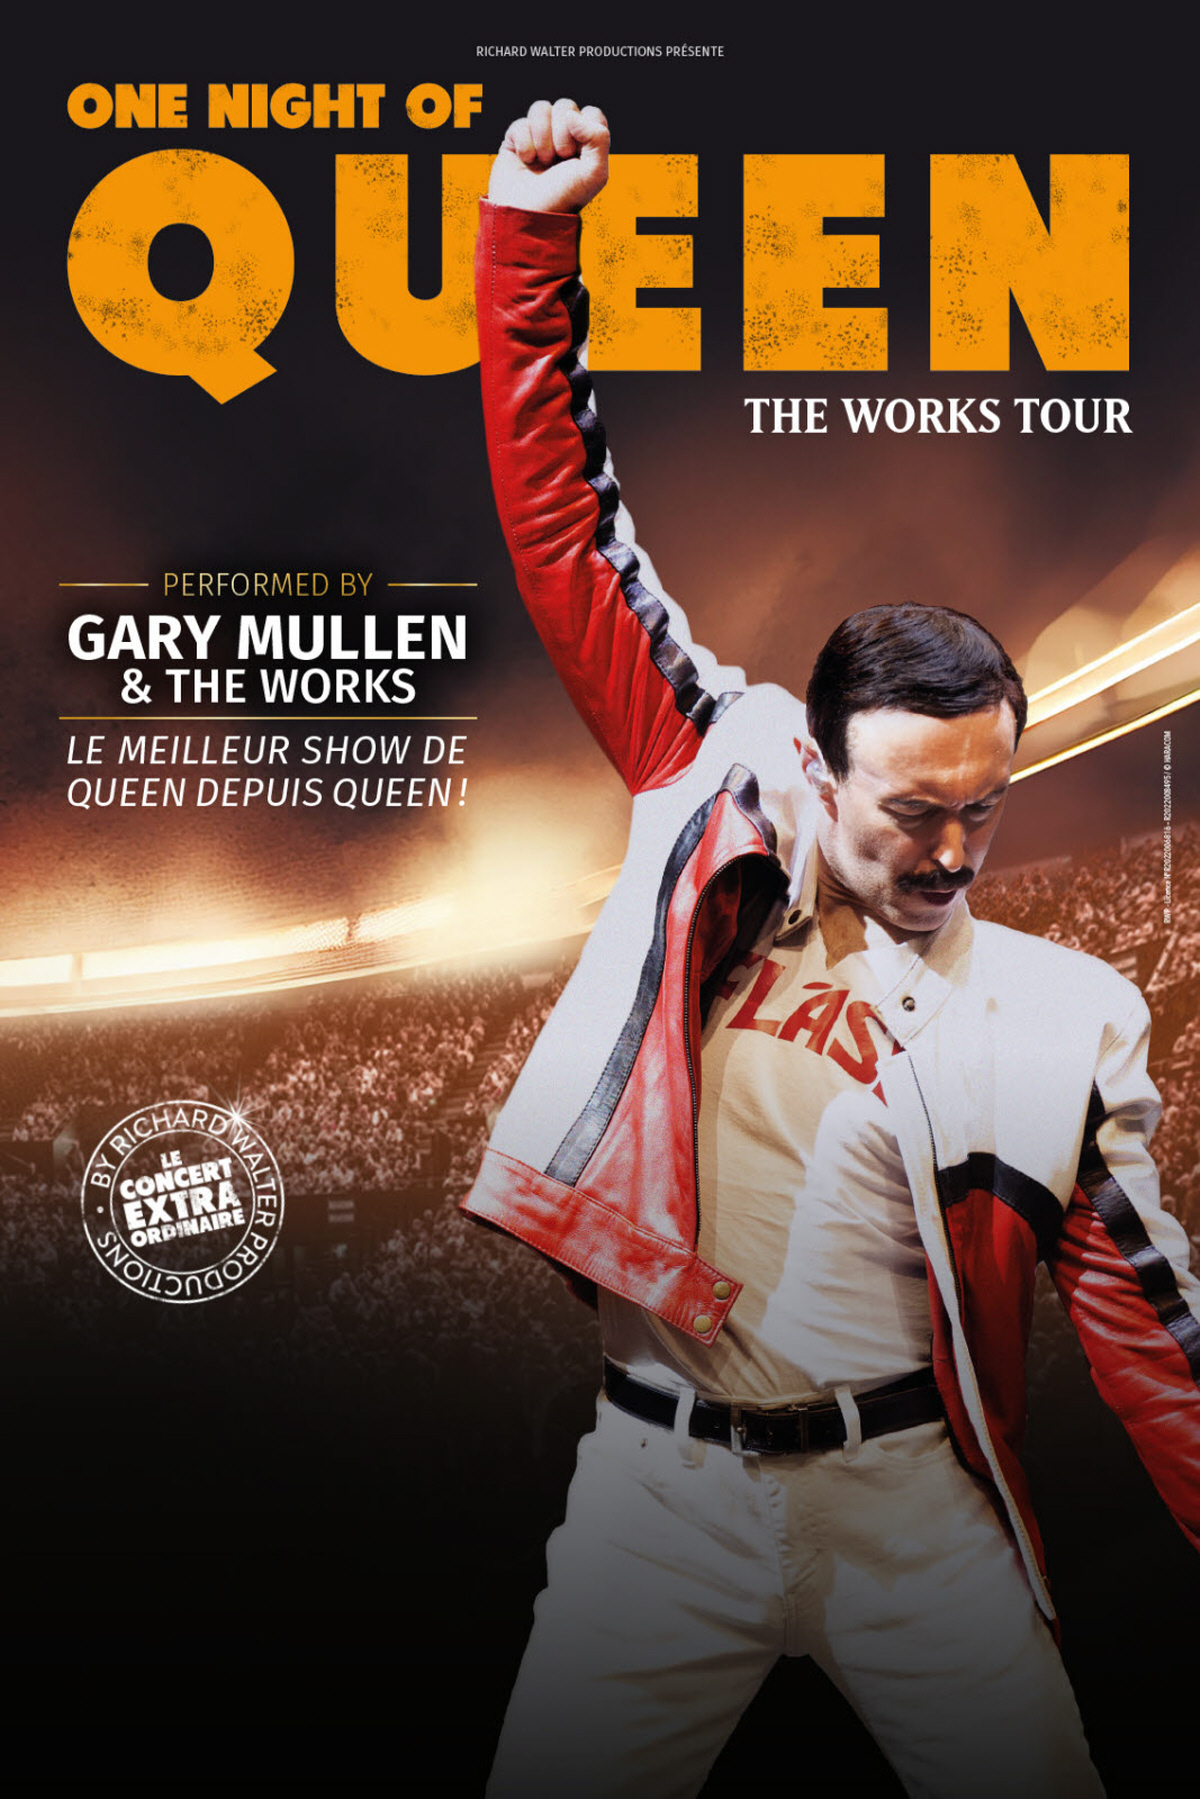 One Night Of Queen - The Works Tour al Elispace Tickets